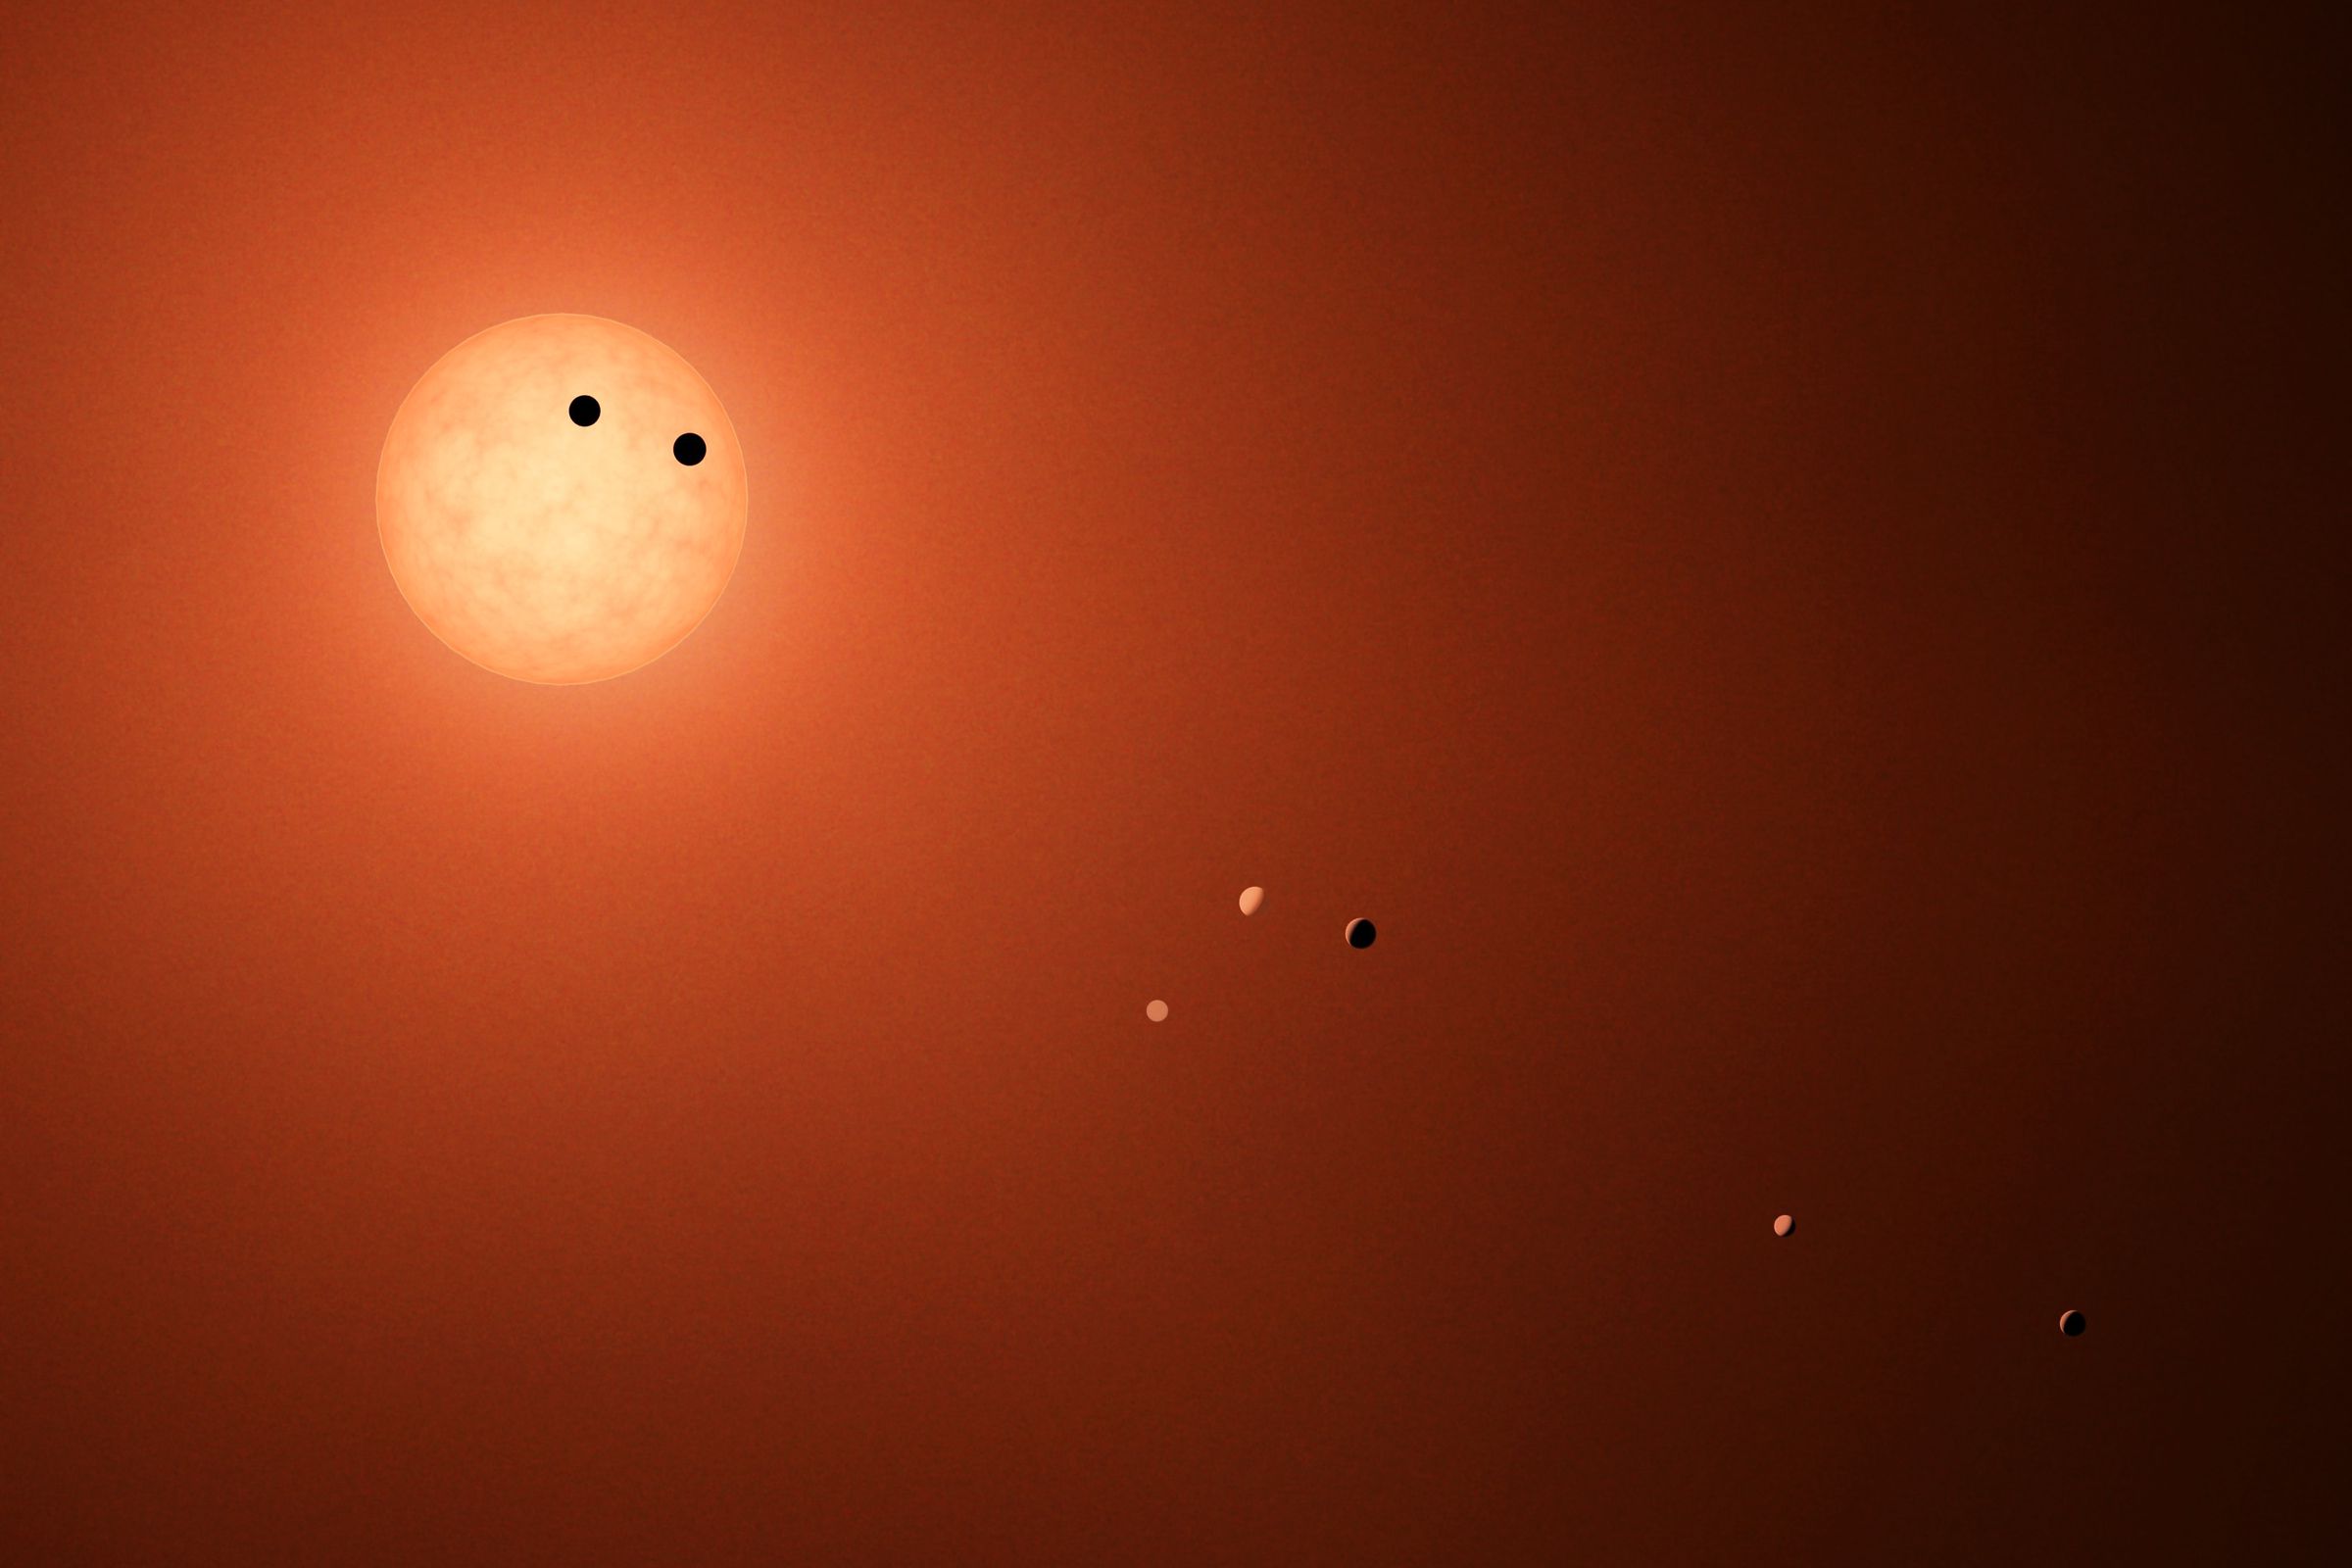 An illustration showing the seven Earth-like planets of Trappist-1, a nearby star system astronomers say will be able to view Earth in transit roughly 1,600 years from now.